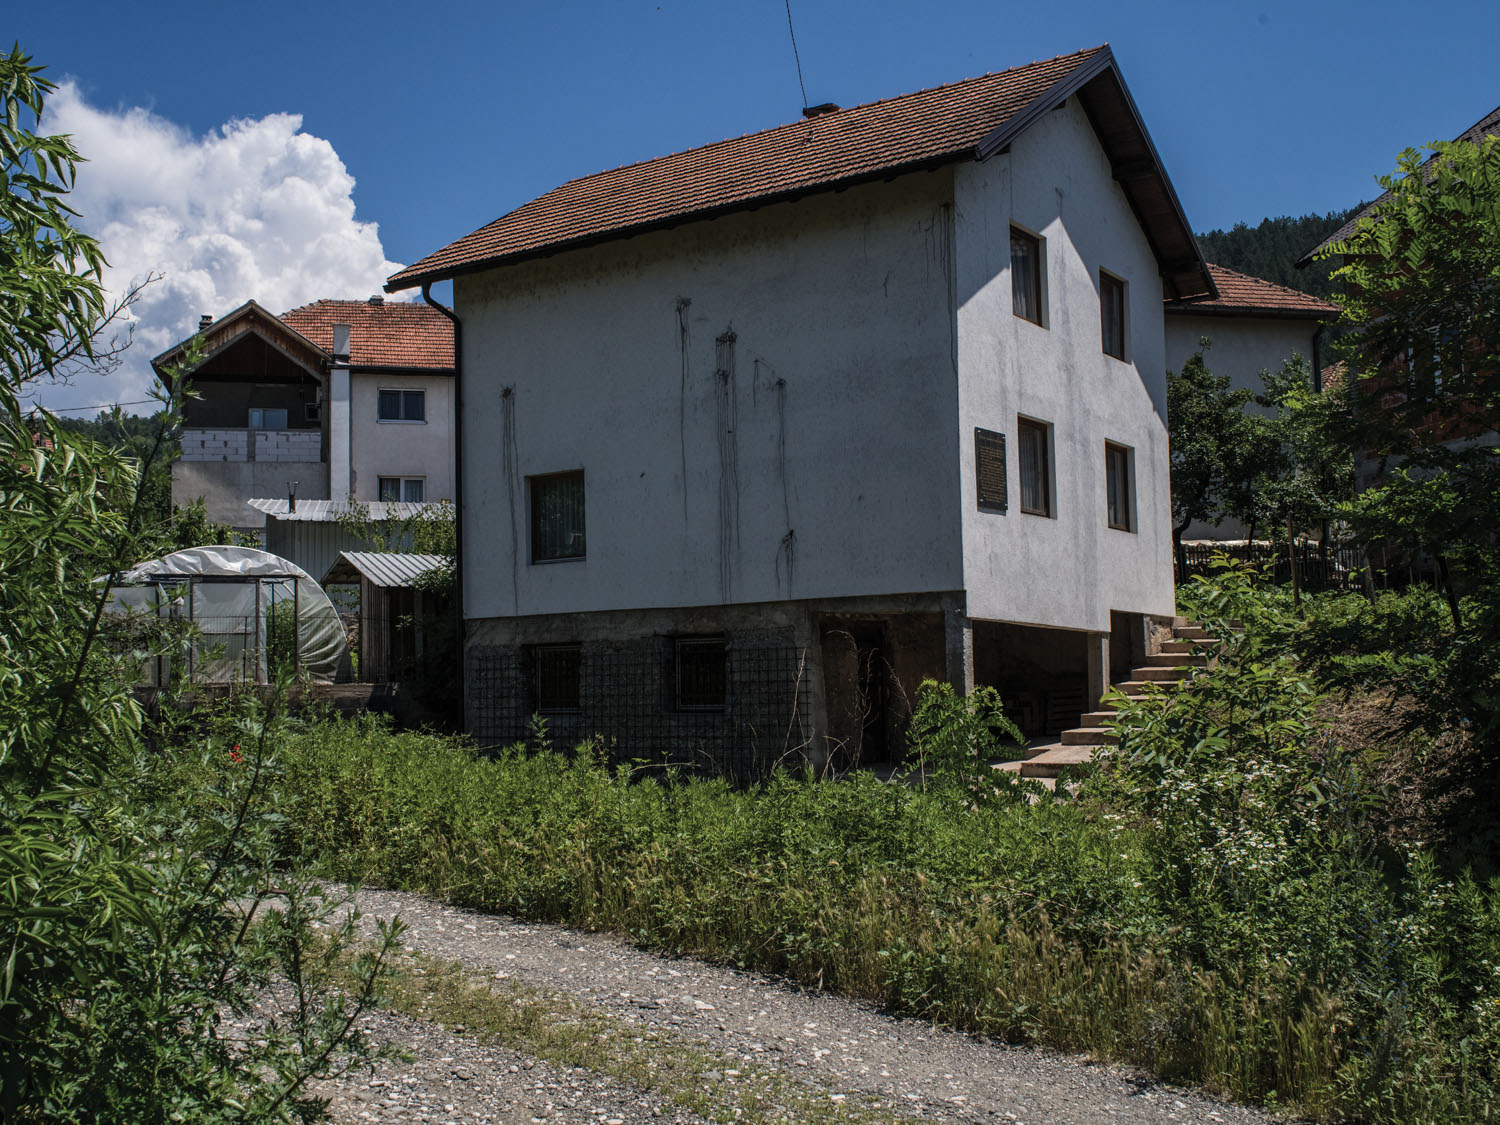 The house on Pionirska Street, where, in 1992, nearly sixty Bosniak prisoners were killed after Serb forces set the structure on fire.